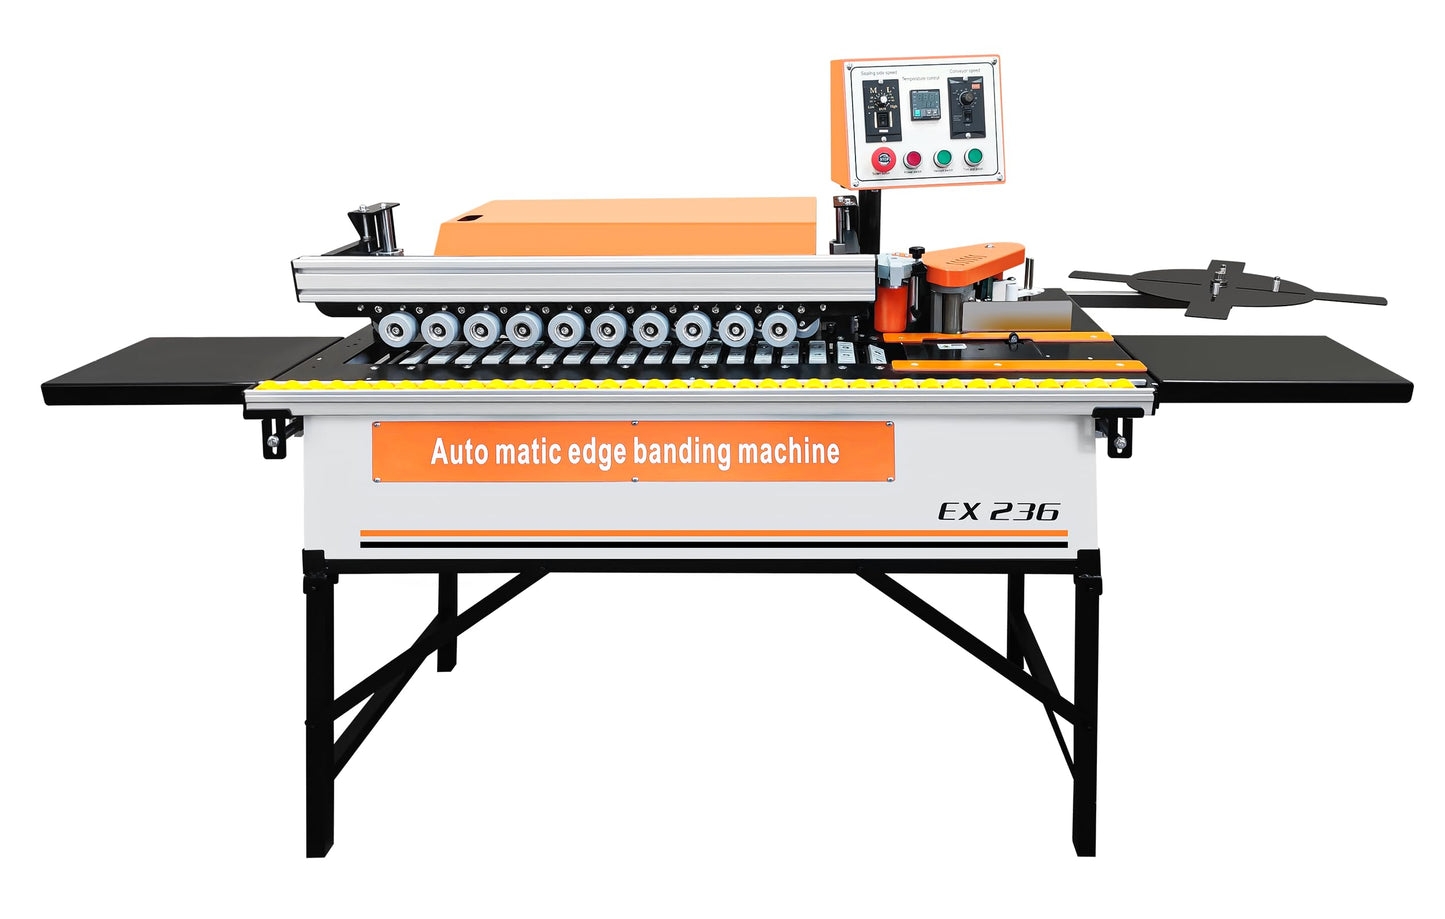 YUCHENGTECH Automatic Edge Bander Banding Machine Woodworking Edge Bander Banding Machine Wood Sealing Trimming Edge Bander Double Sided Gluing